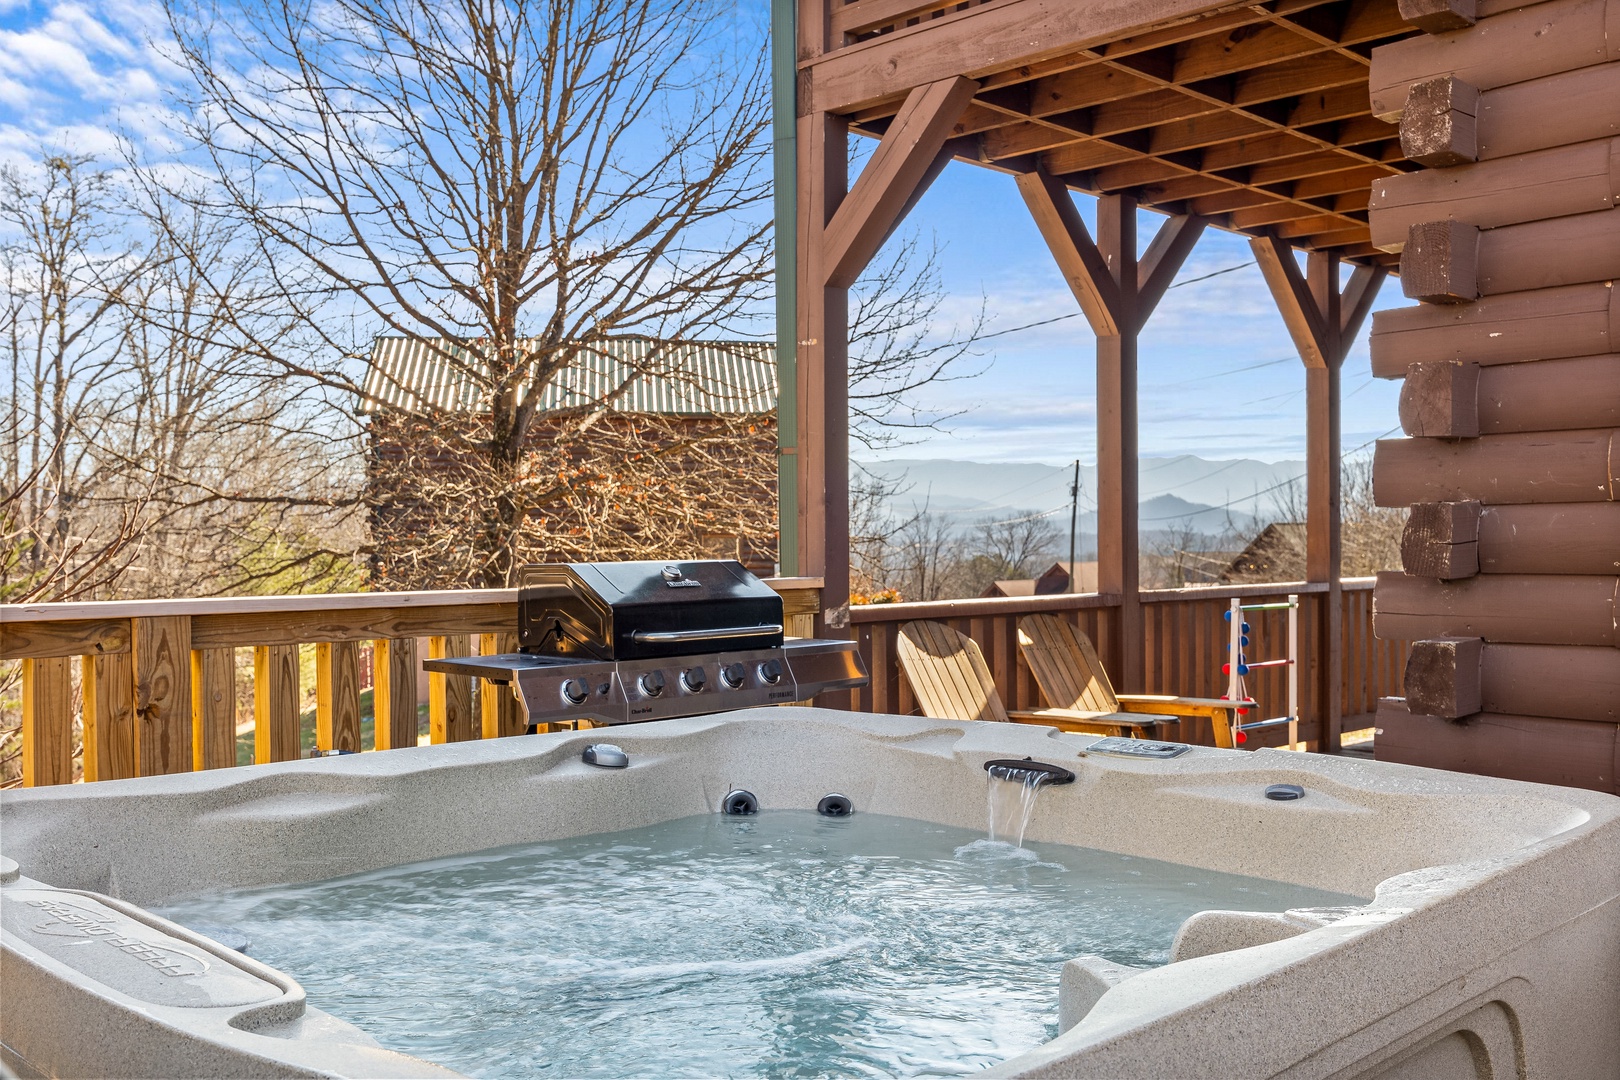 Hot Tub near covered deck at Moose Lodge, a 4 bedroom cabin rental located in Sevierville